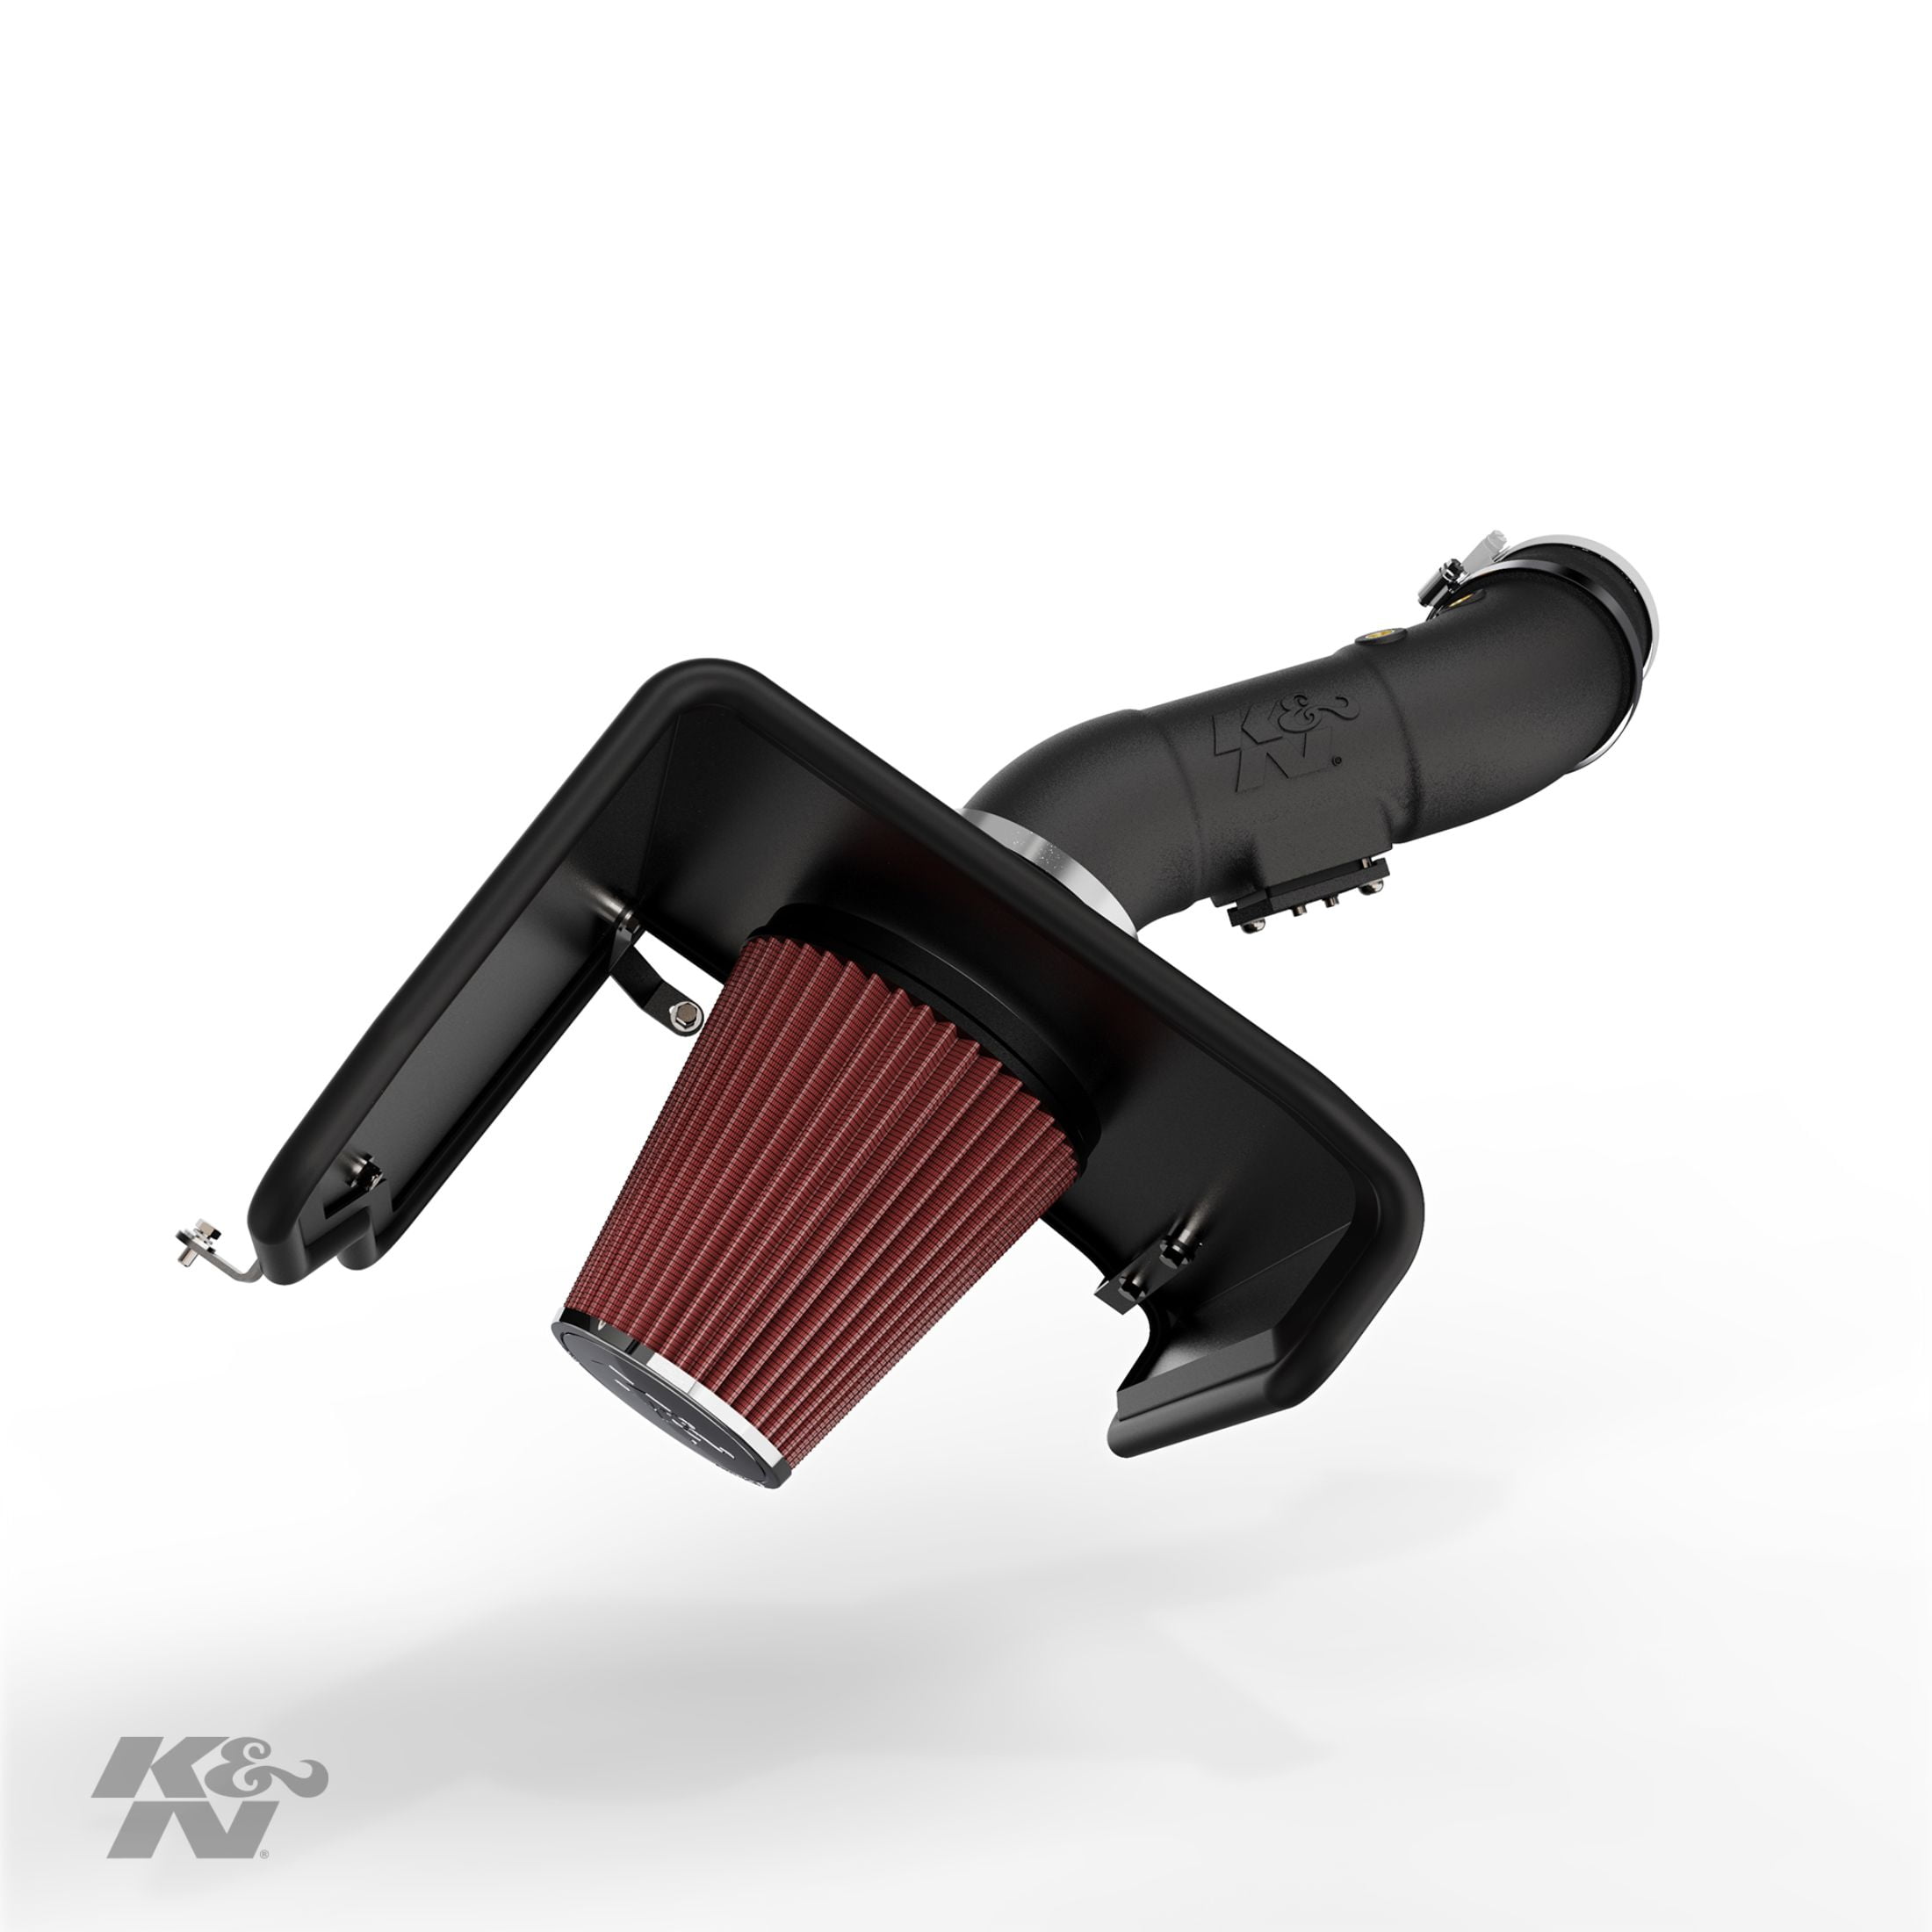 K&N 63-9025 Air Intake System For Toyota Tacoma 4.0 V6 2005-2011 IN STOCK